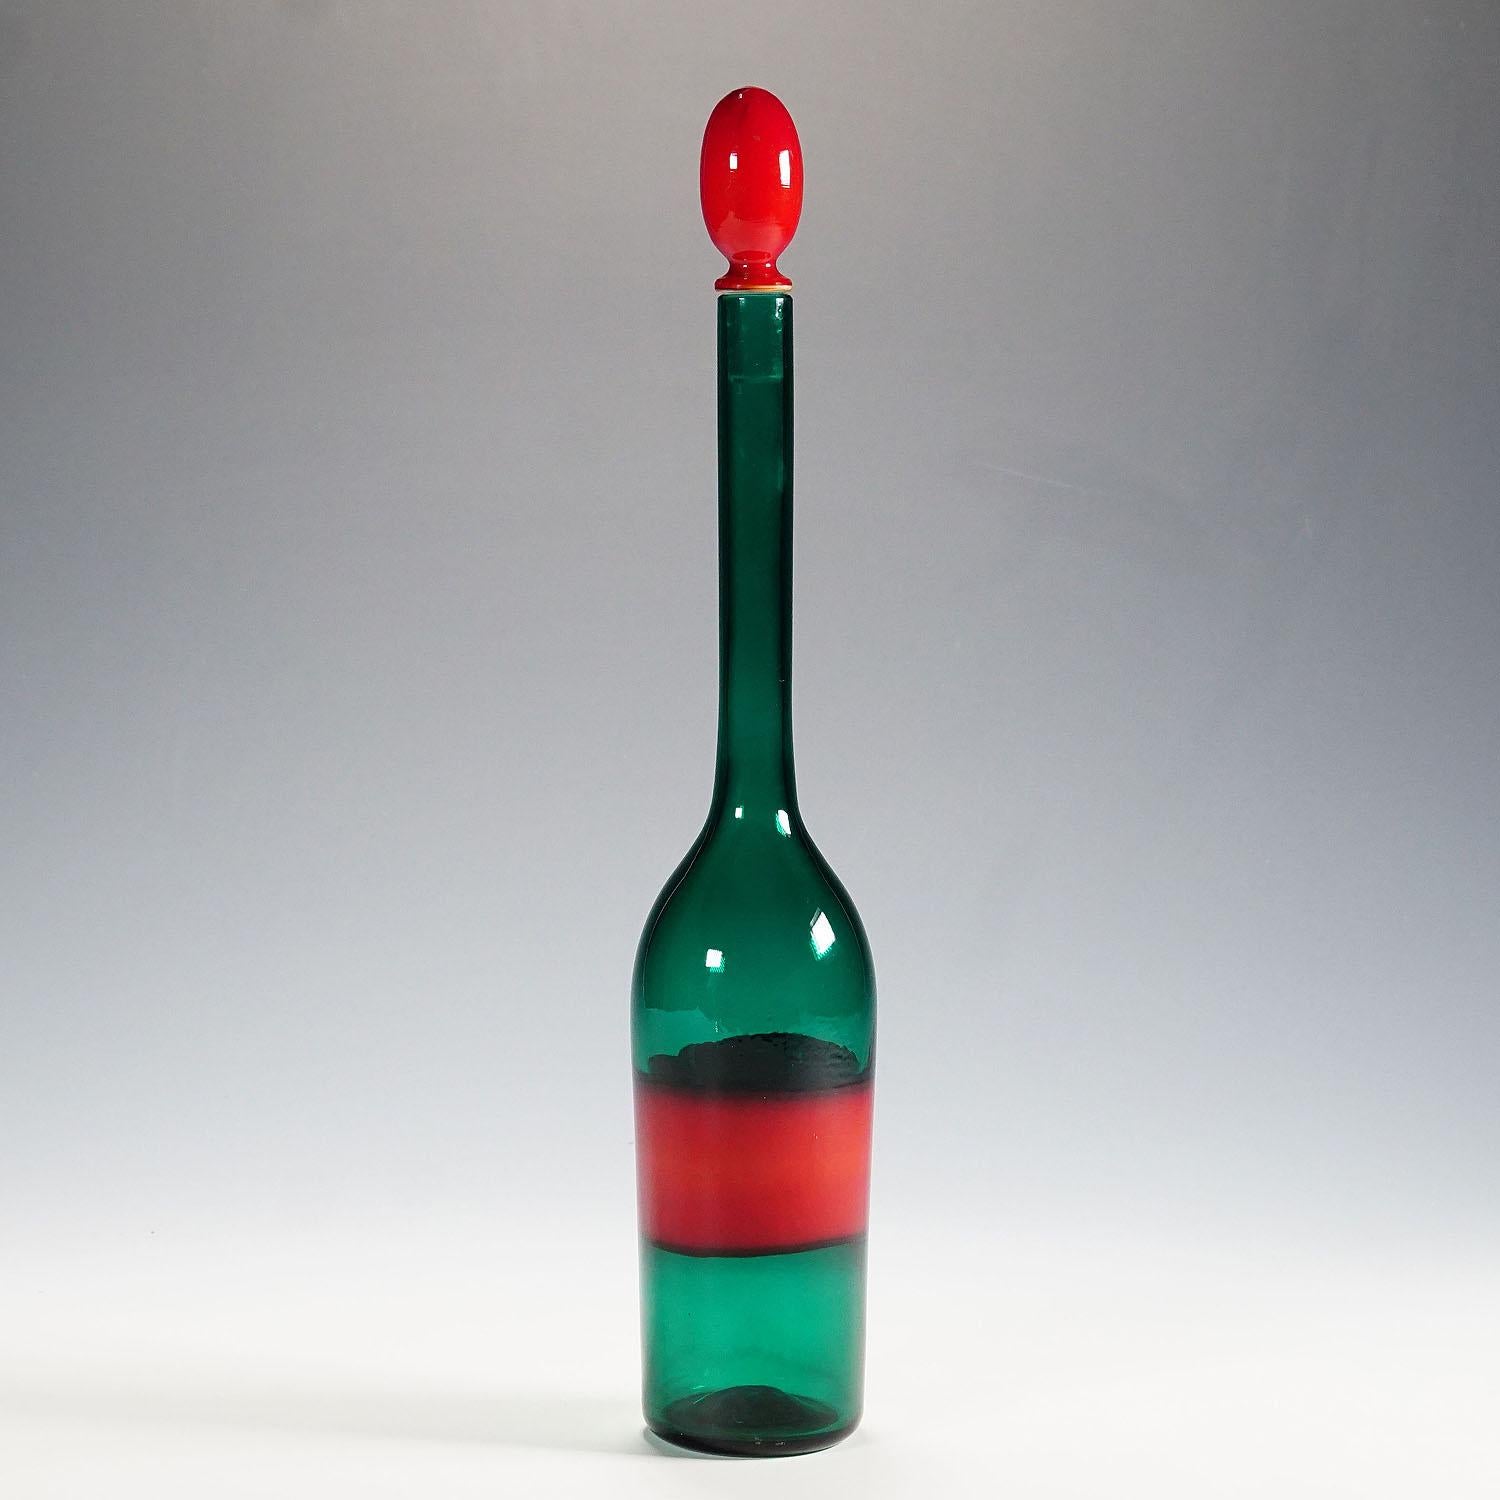 Mid-Century Modern Venini Art Glass Bottle with Fasce Decoration, Murano 1950s For Sale